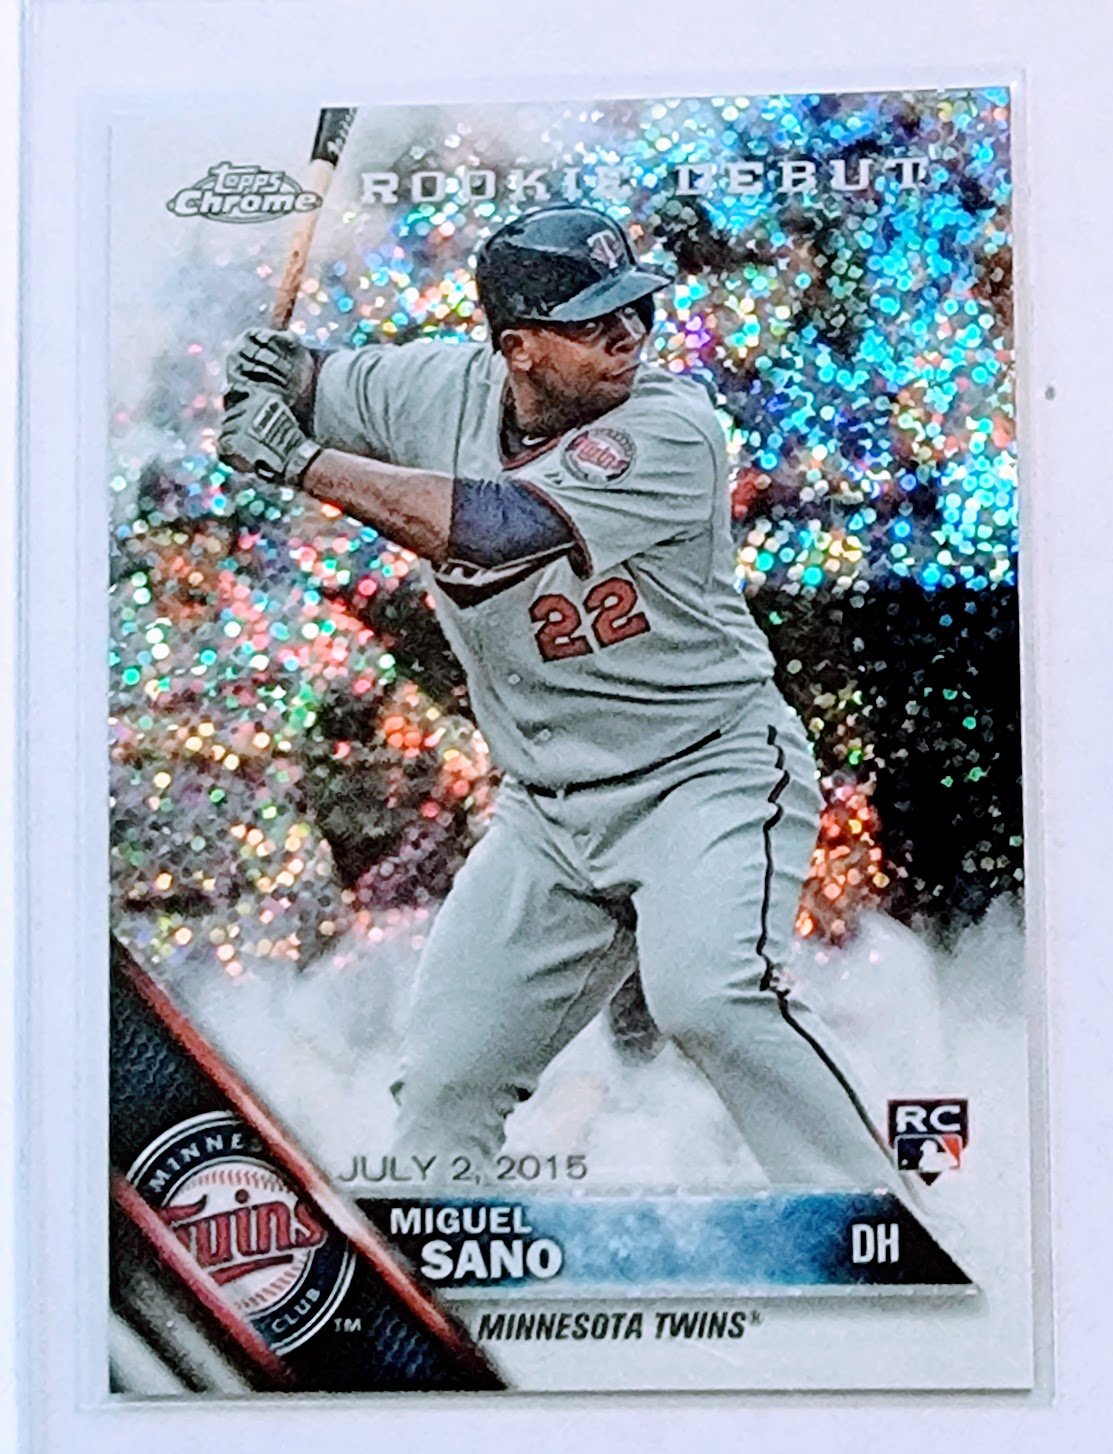 2016 Topps Chrome Update Miguel Sano Rookie Debut Sparkle Rookie Refractor Baseball Card TPTV simple Xclusive Collectibles   